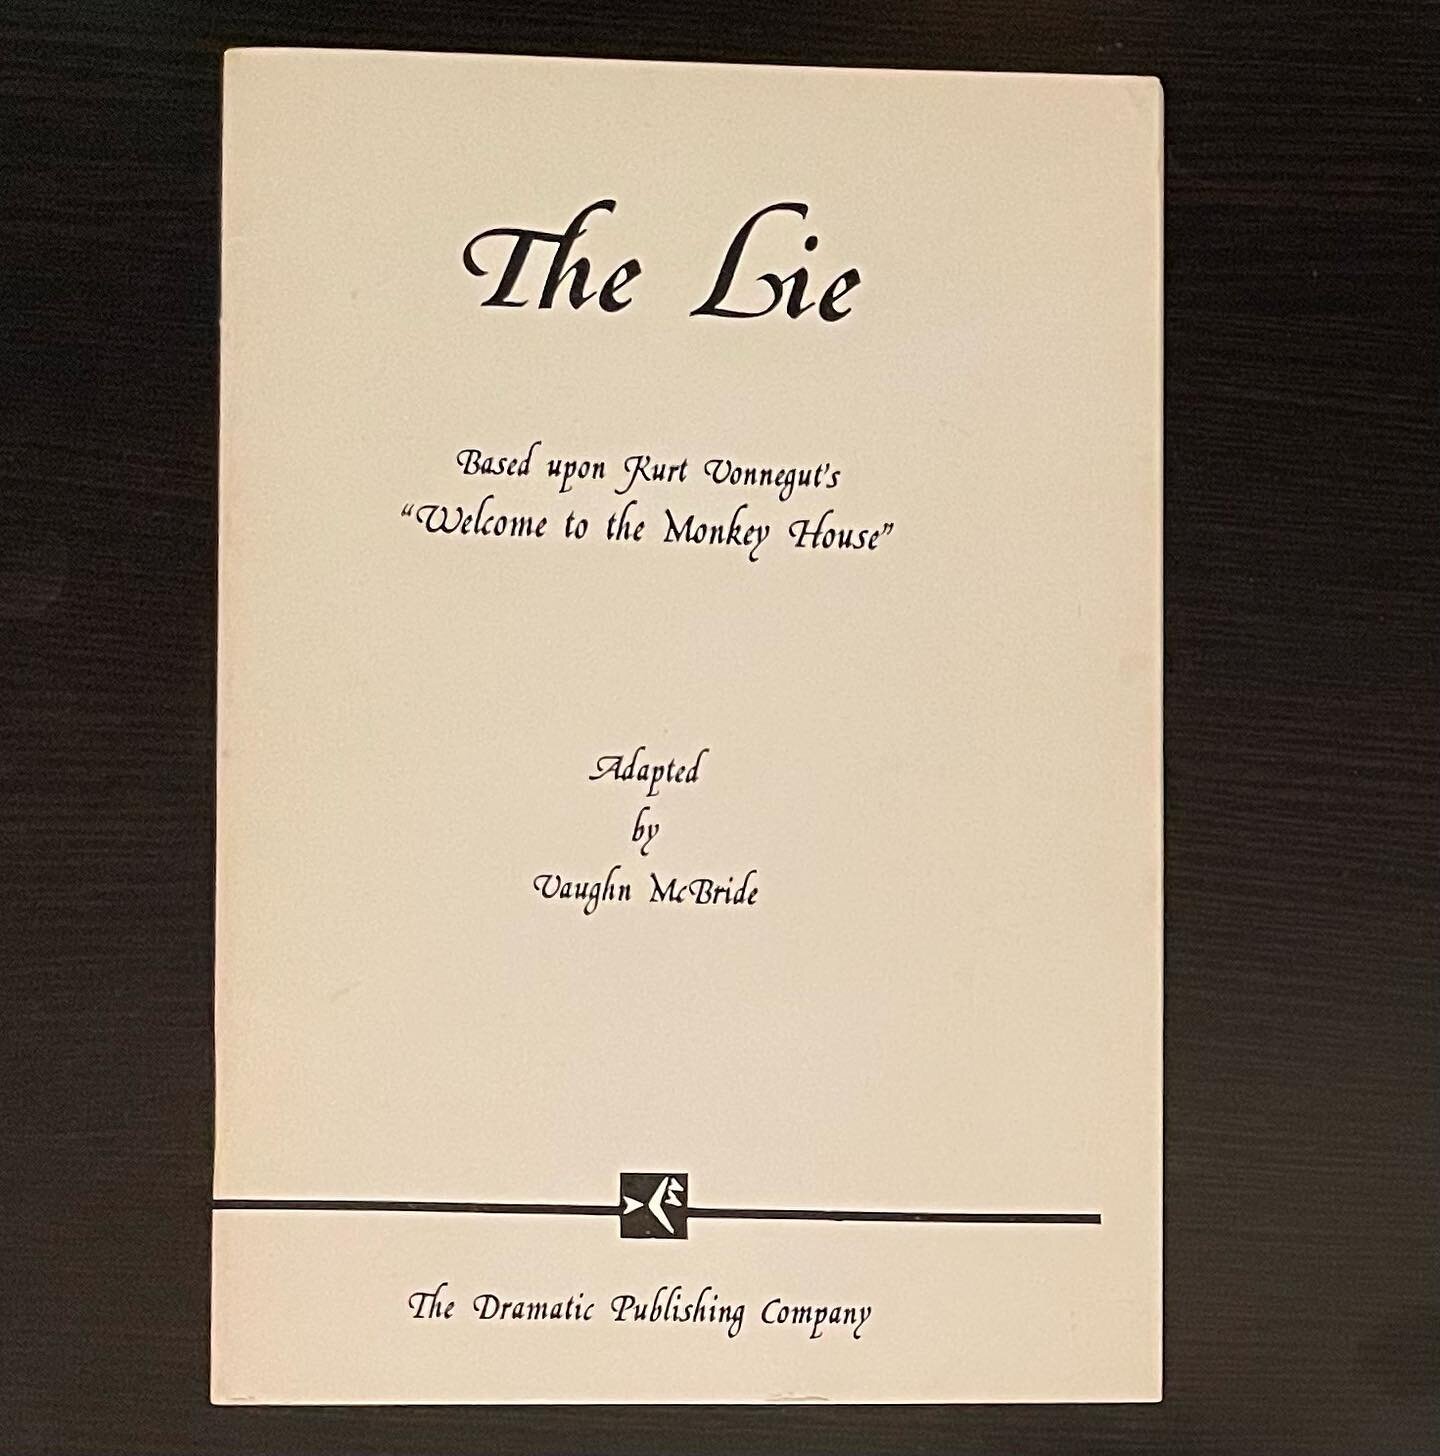 📚🎭 
&ldquo;The Lie&rdquo; &mdash; Drama/Play Booklet; based on the 18th story in 𝘞𝘦𝘭𝘤𝘰𝘮𝘦 𝘵𝘰 𝘵𝘩𝘦 𝘔𝘰𝘯𝘬𝘦𝘺 𝘏𝘰𝘶𝘴𝘦&mdash; Adapted by Vaughn McBride &mdash; The Dramatic Publishing Company,  1992
#KurtVonnegut
#BookCollection
#Books